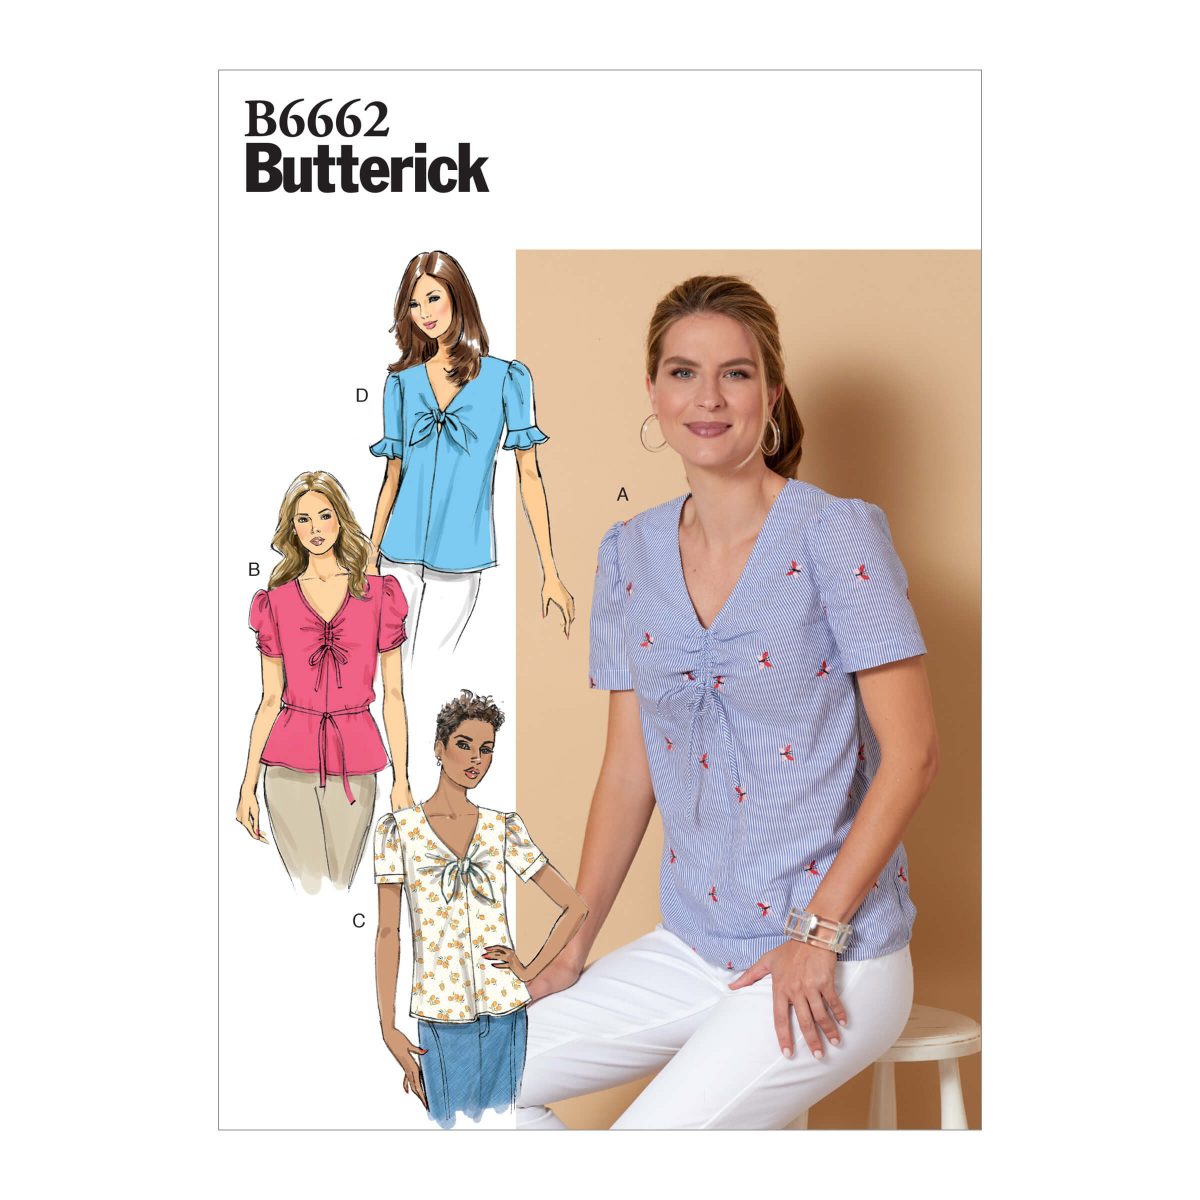 Butterick Sewing Pattern B6662 Misses' Top and Tie